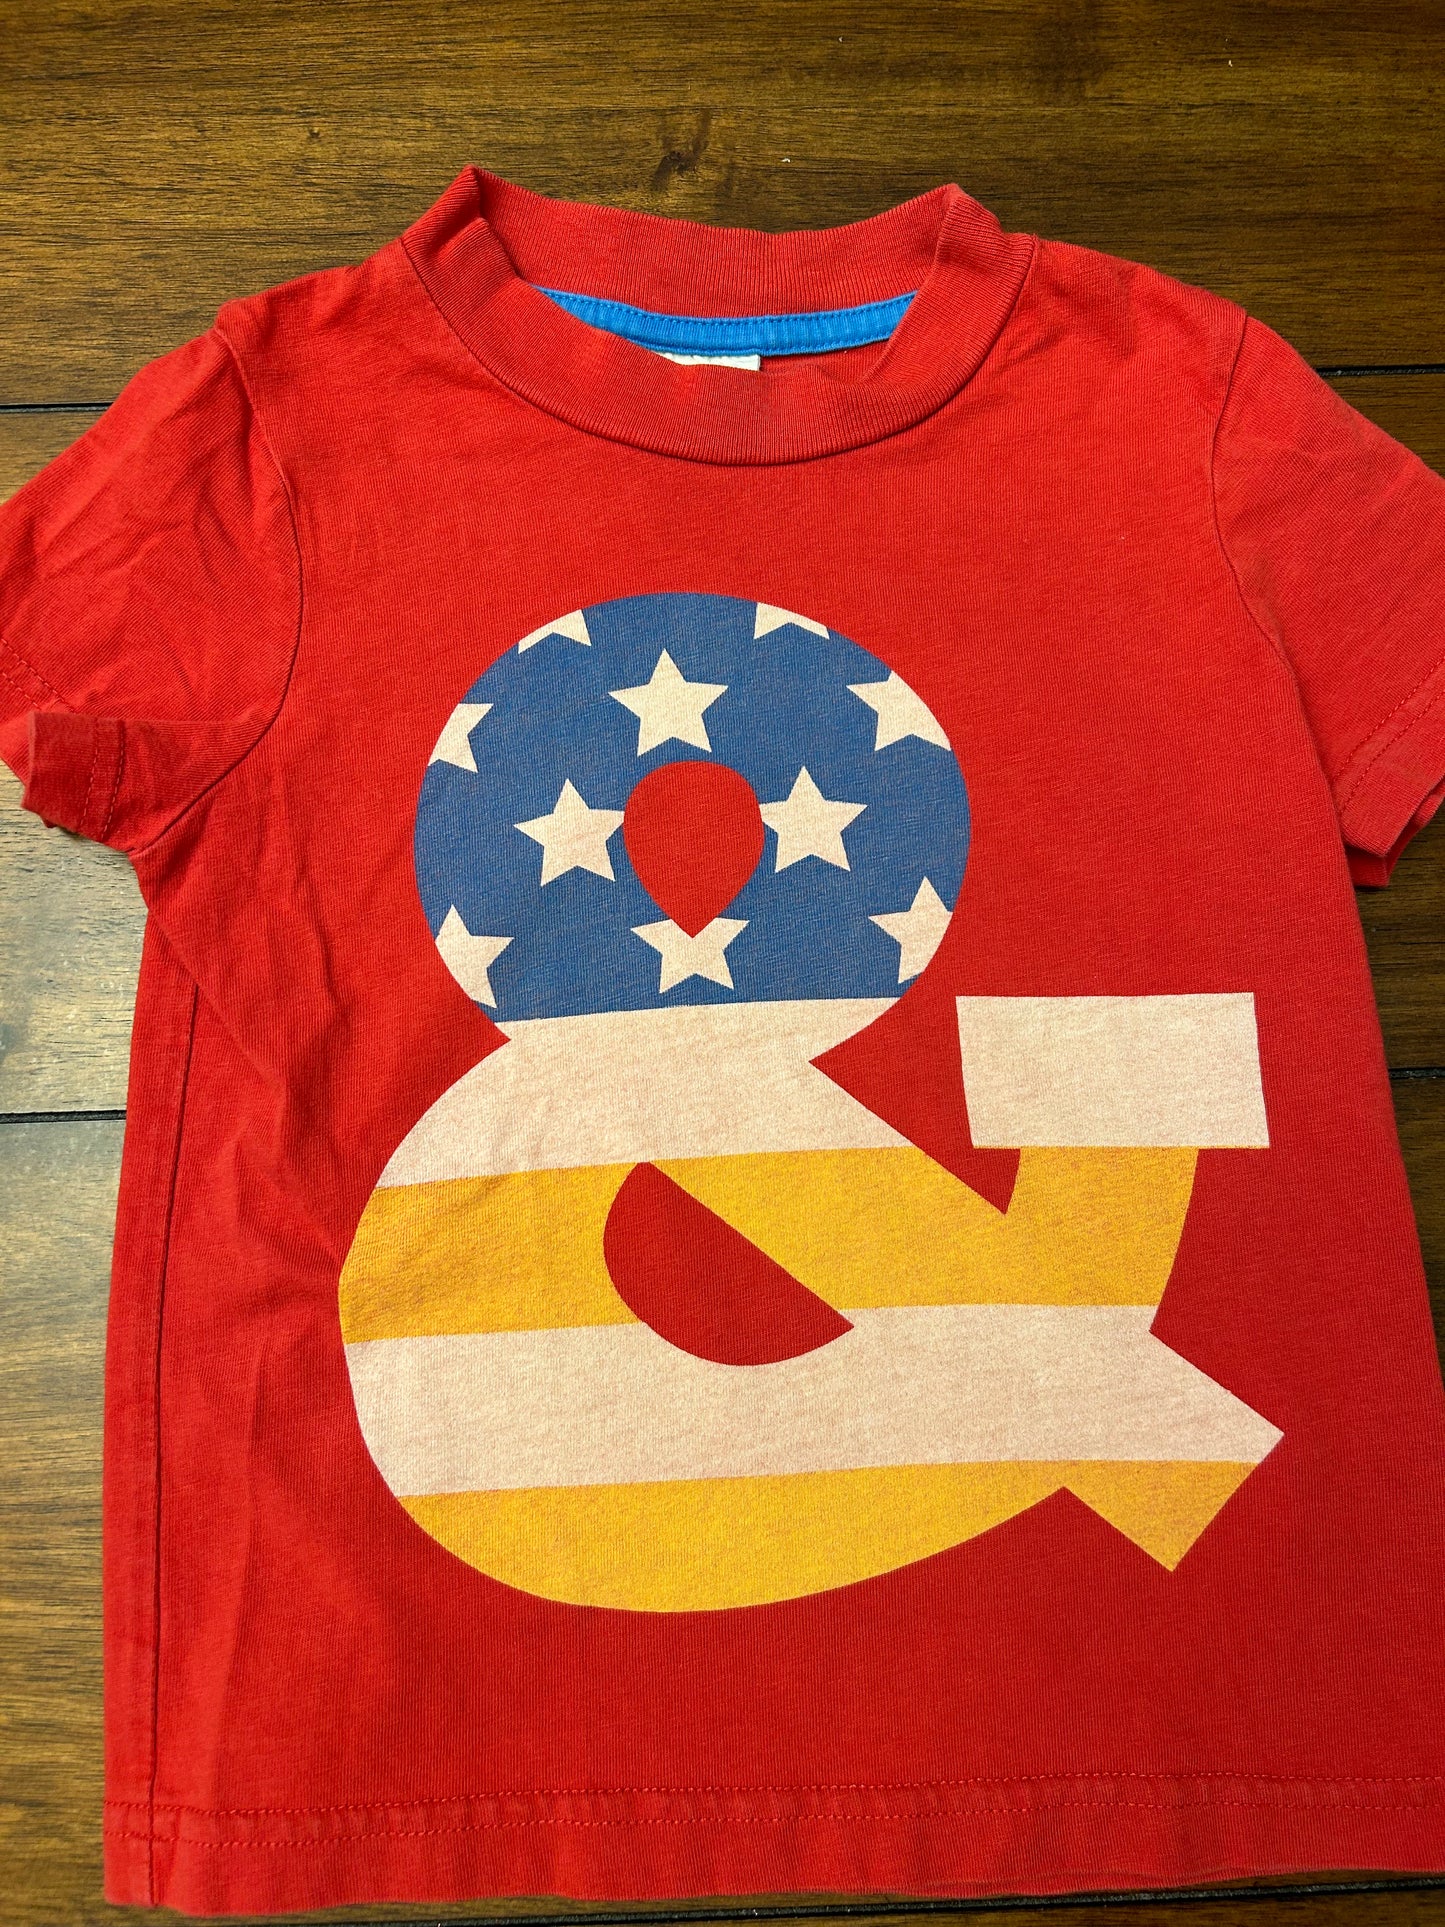 Mini Boden Boys Red Ampersand Graphic T-shirt Size 2-3 PPU 45040